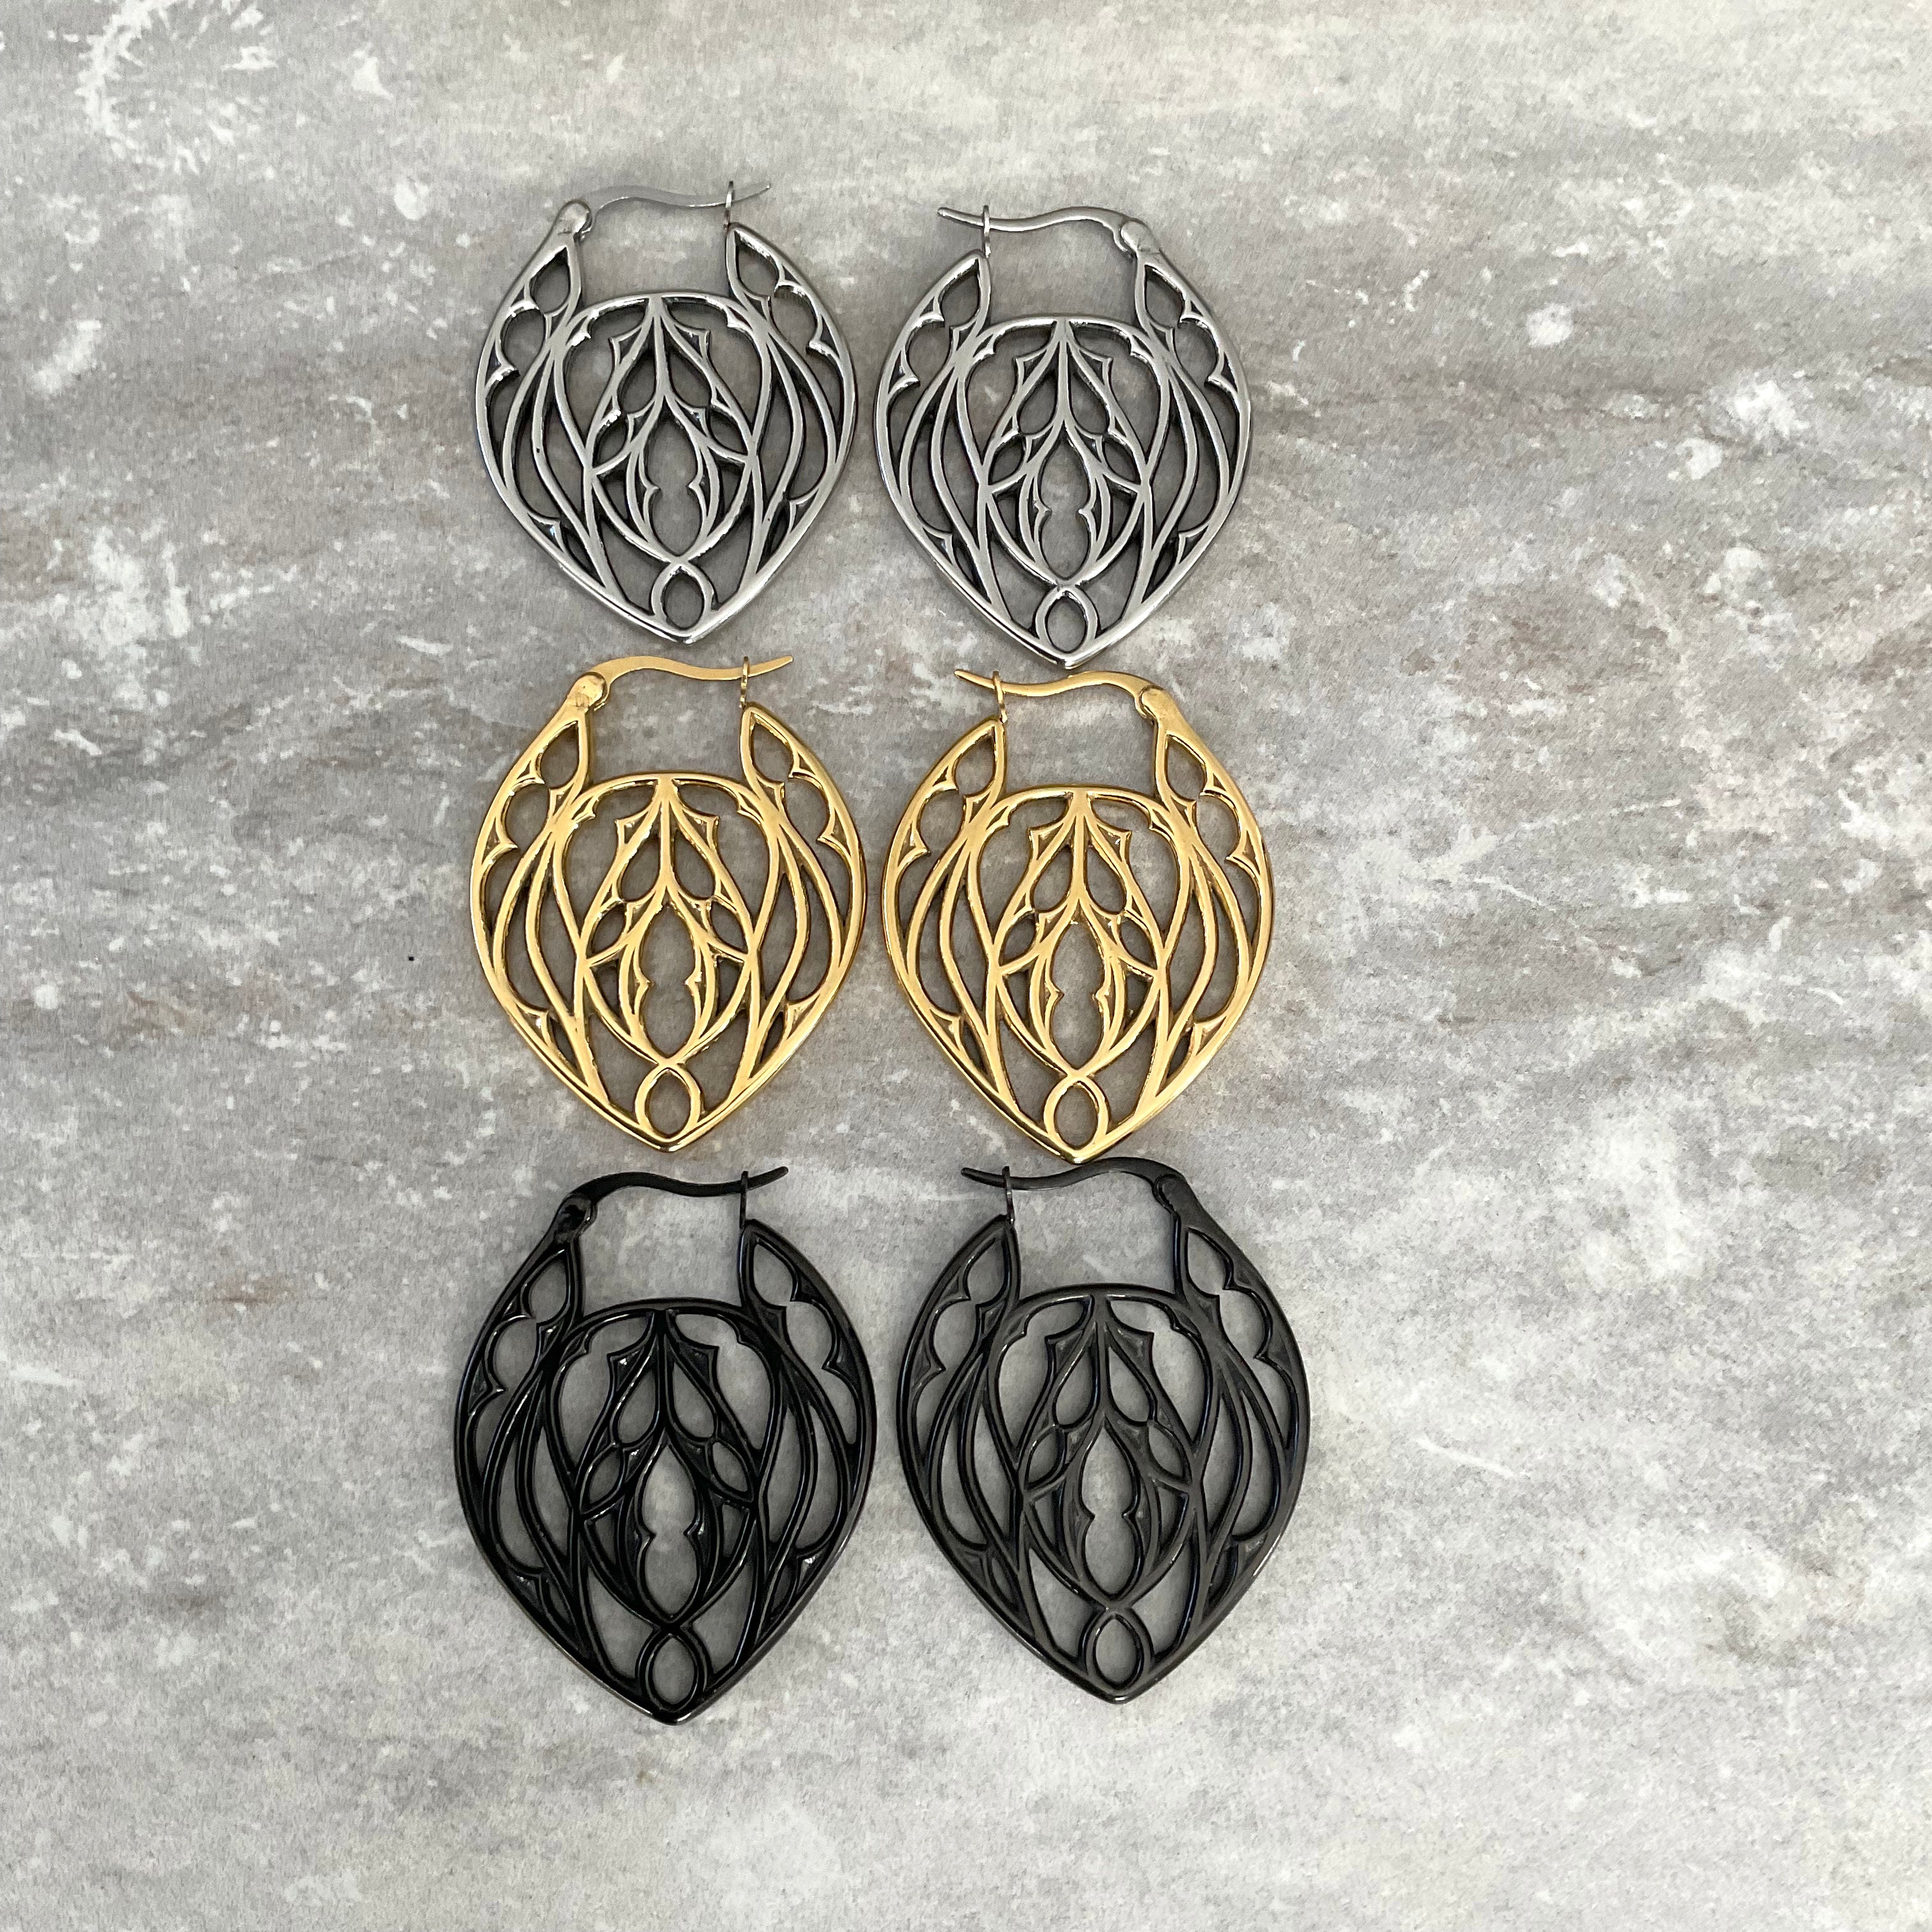 GOTHIC LACE HOOP EARRINGS IN GOLD